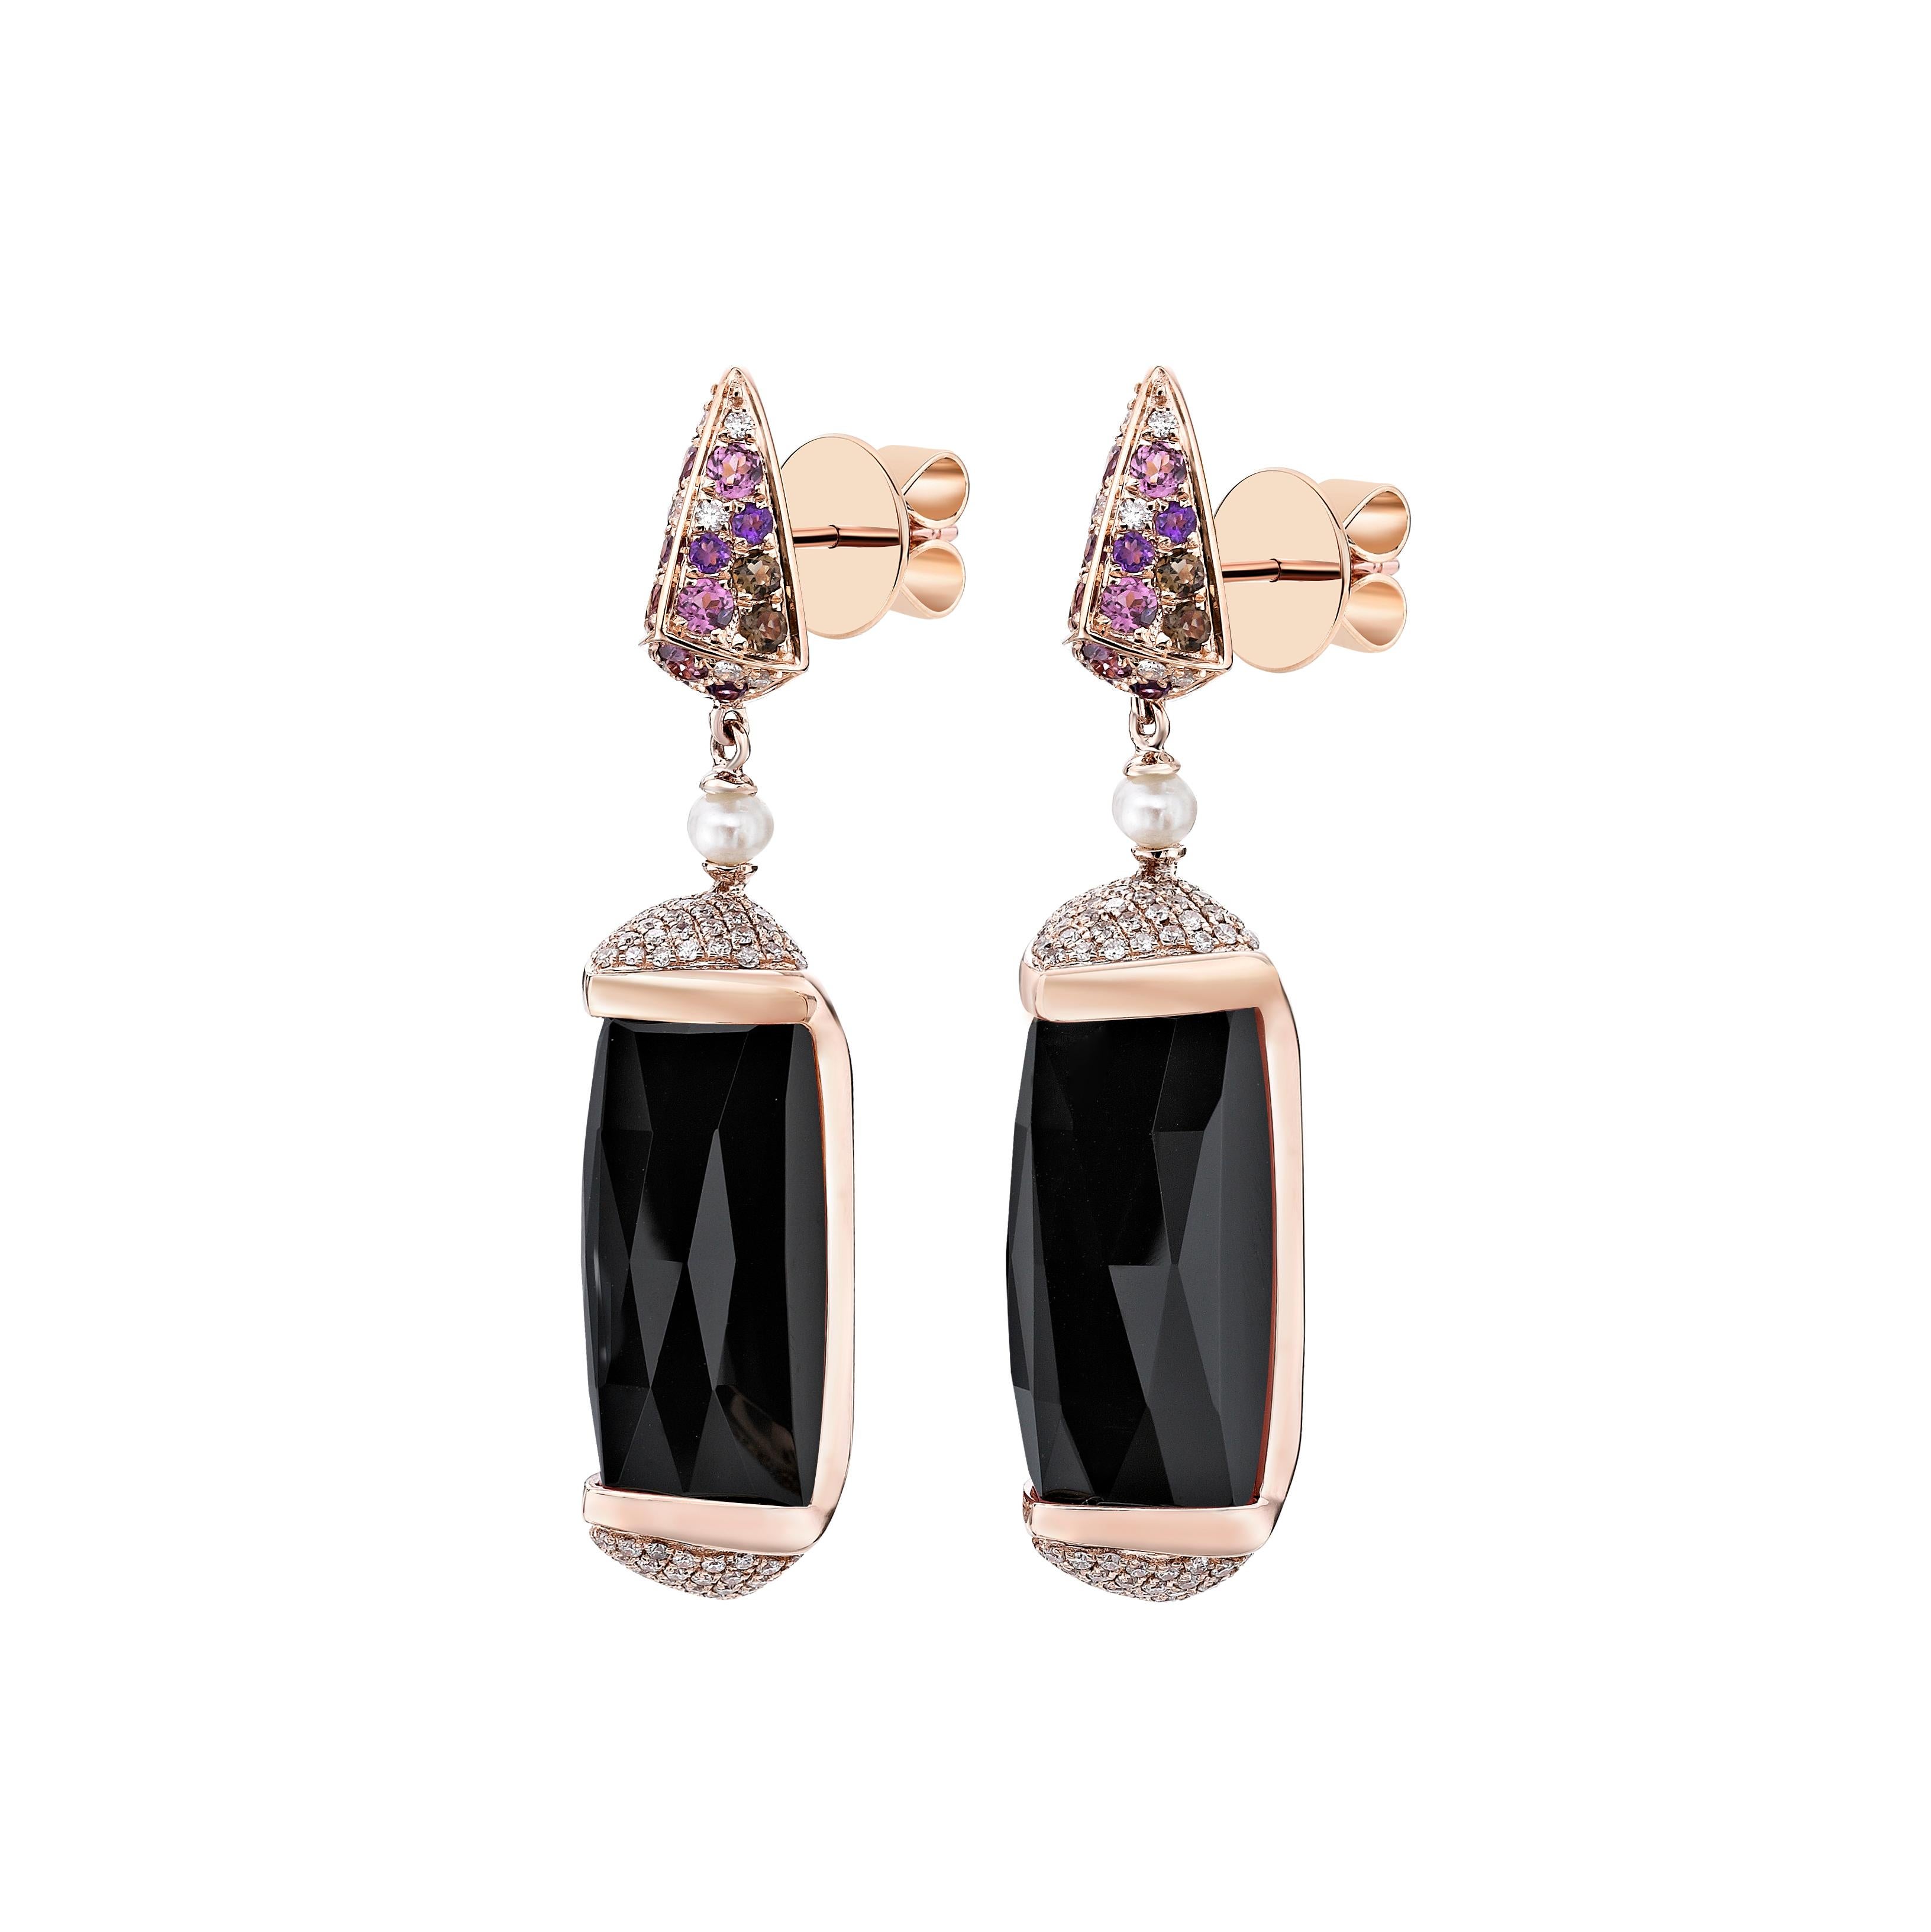 45 Carat Black Onyx Ring and Earring Set in 18 Karat Rose Gold with Diamonds For Sale 2